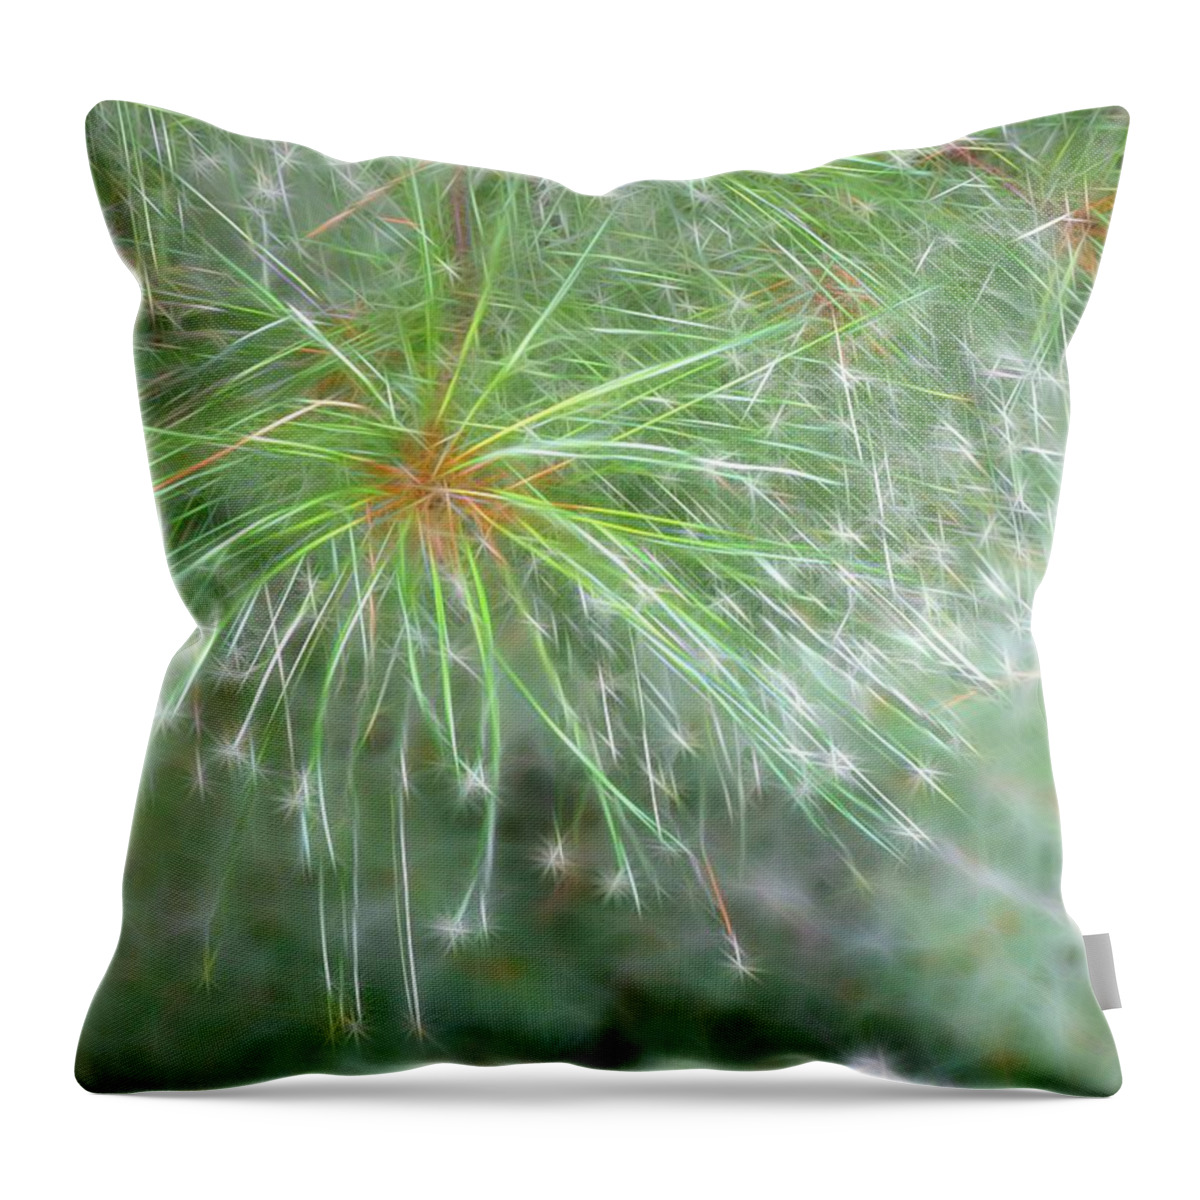 Pine Throw Pillow featuring the photograph Sparkly Pine by Rhonda Barrett